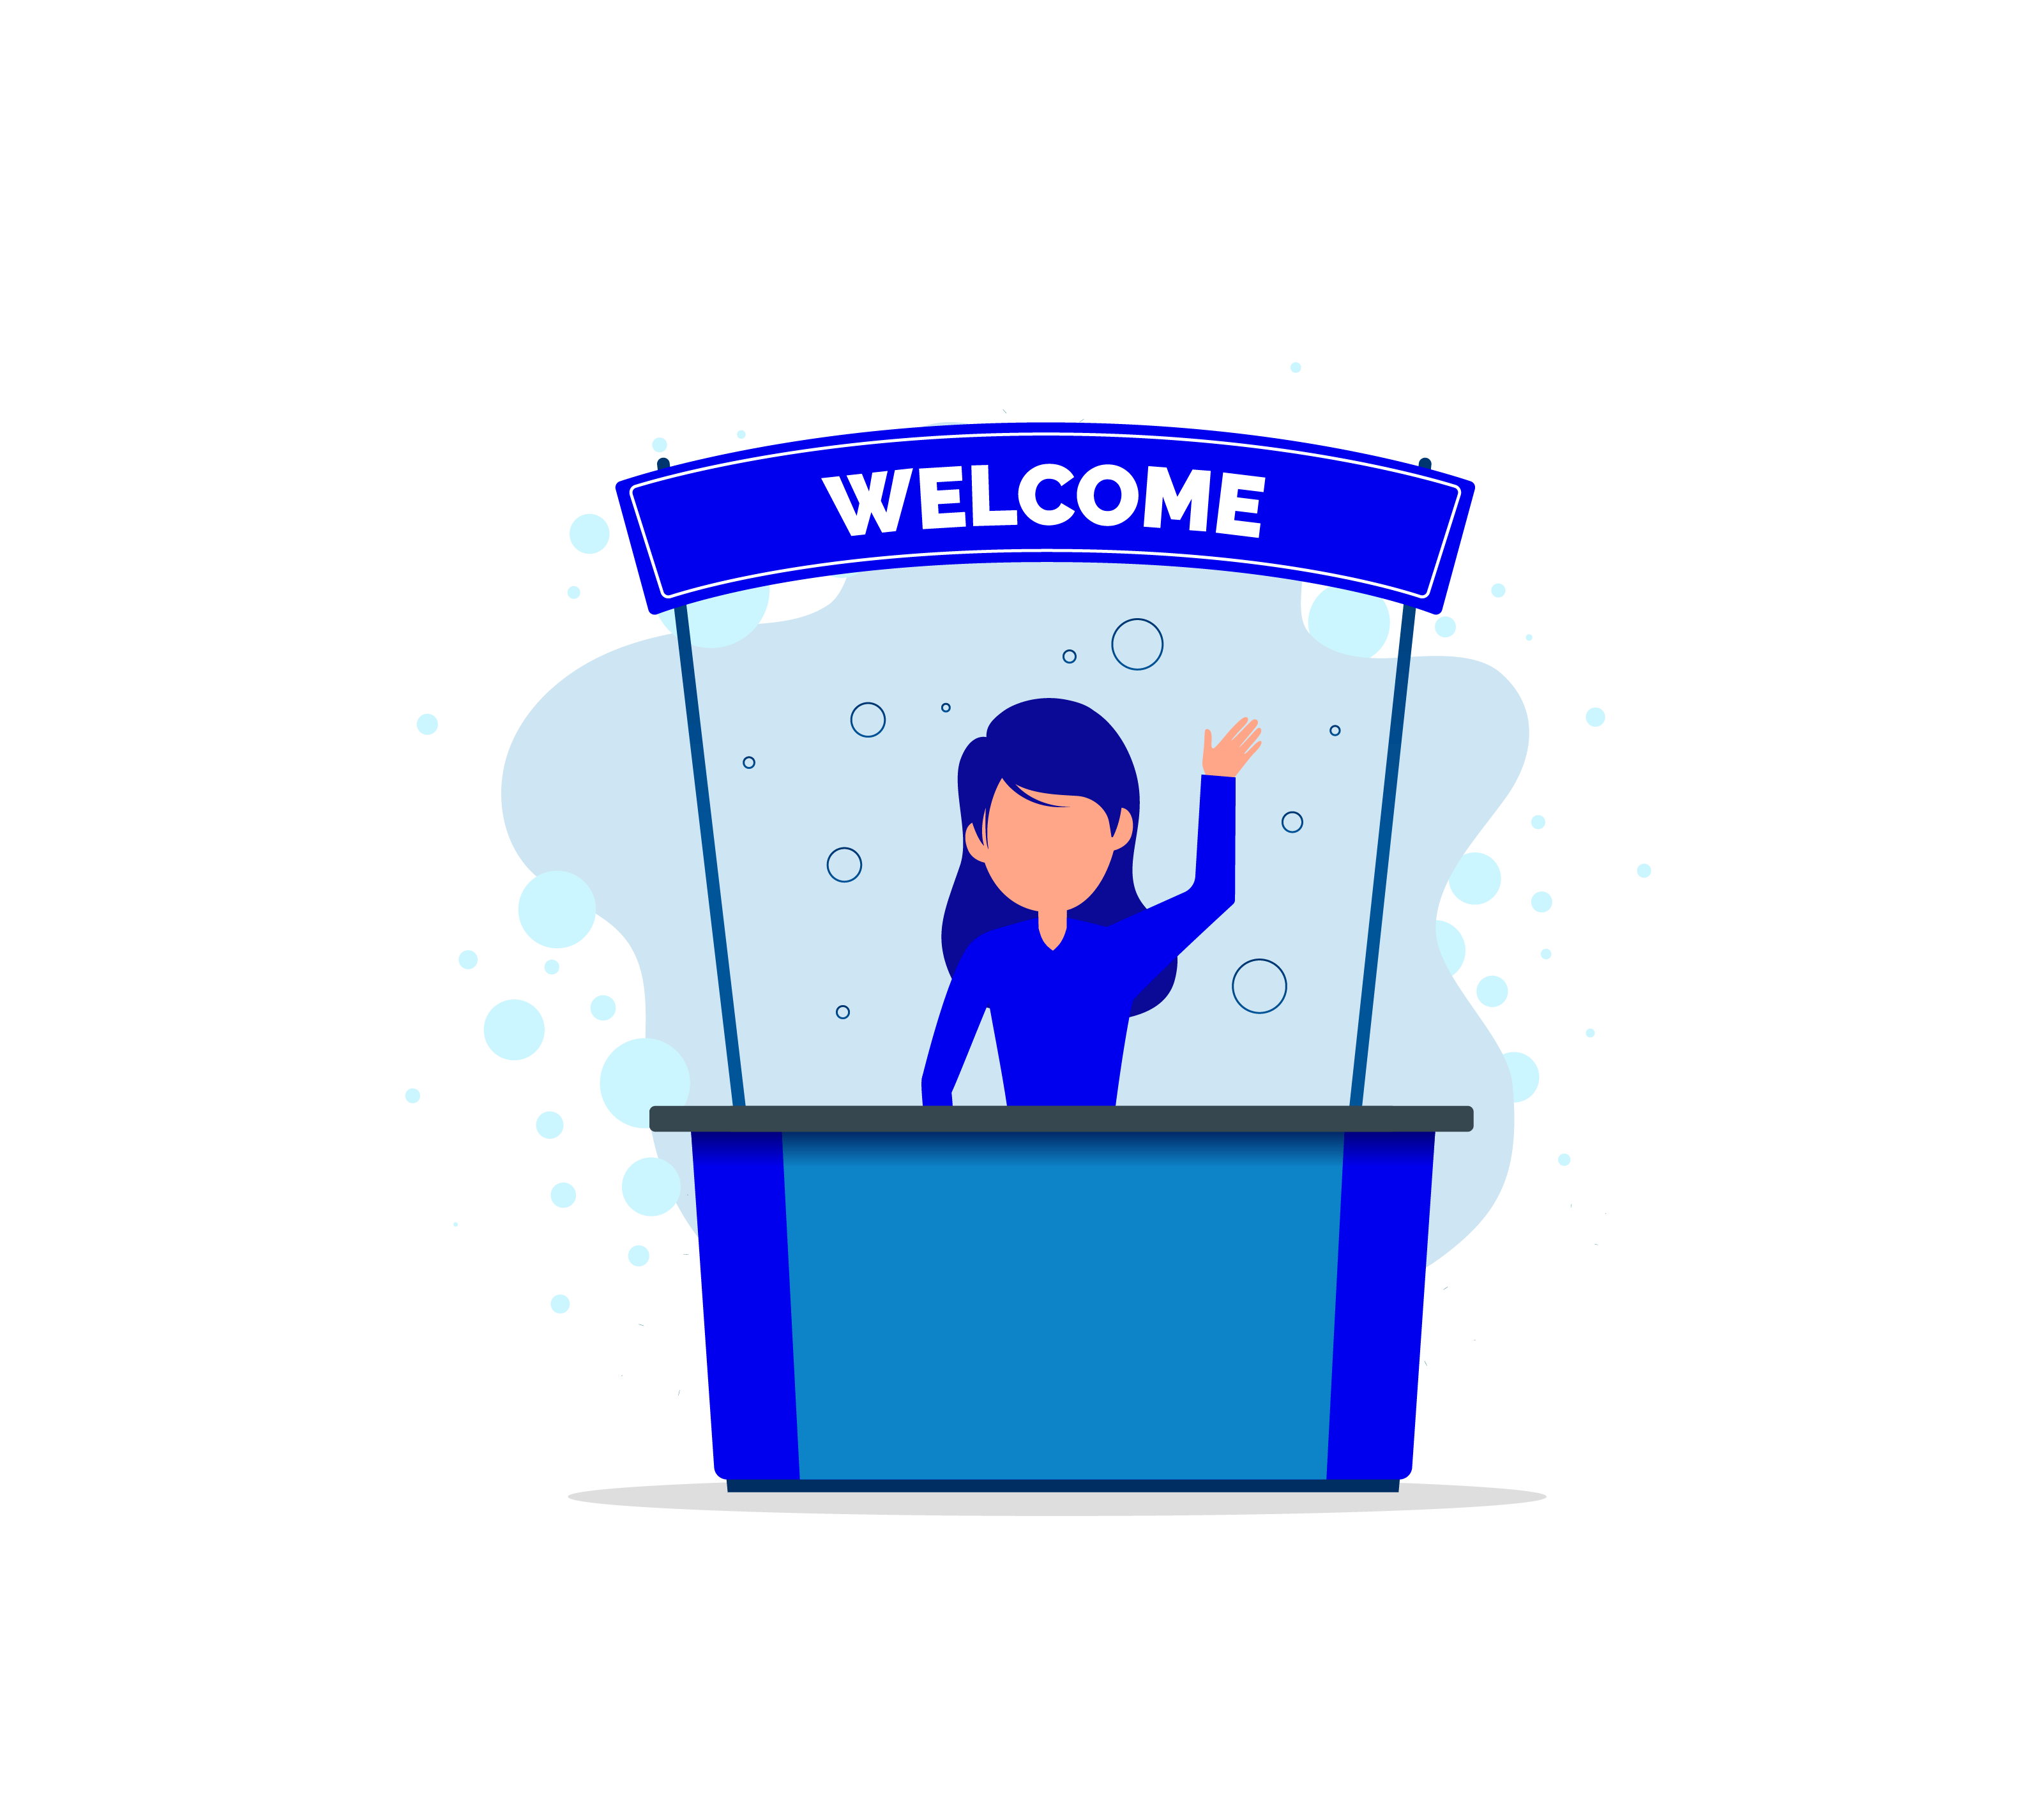 Digital image of blue stand with a person waving. Sign says Welcome